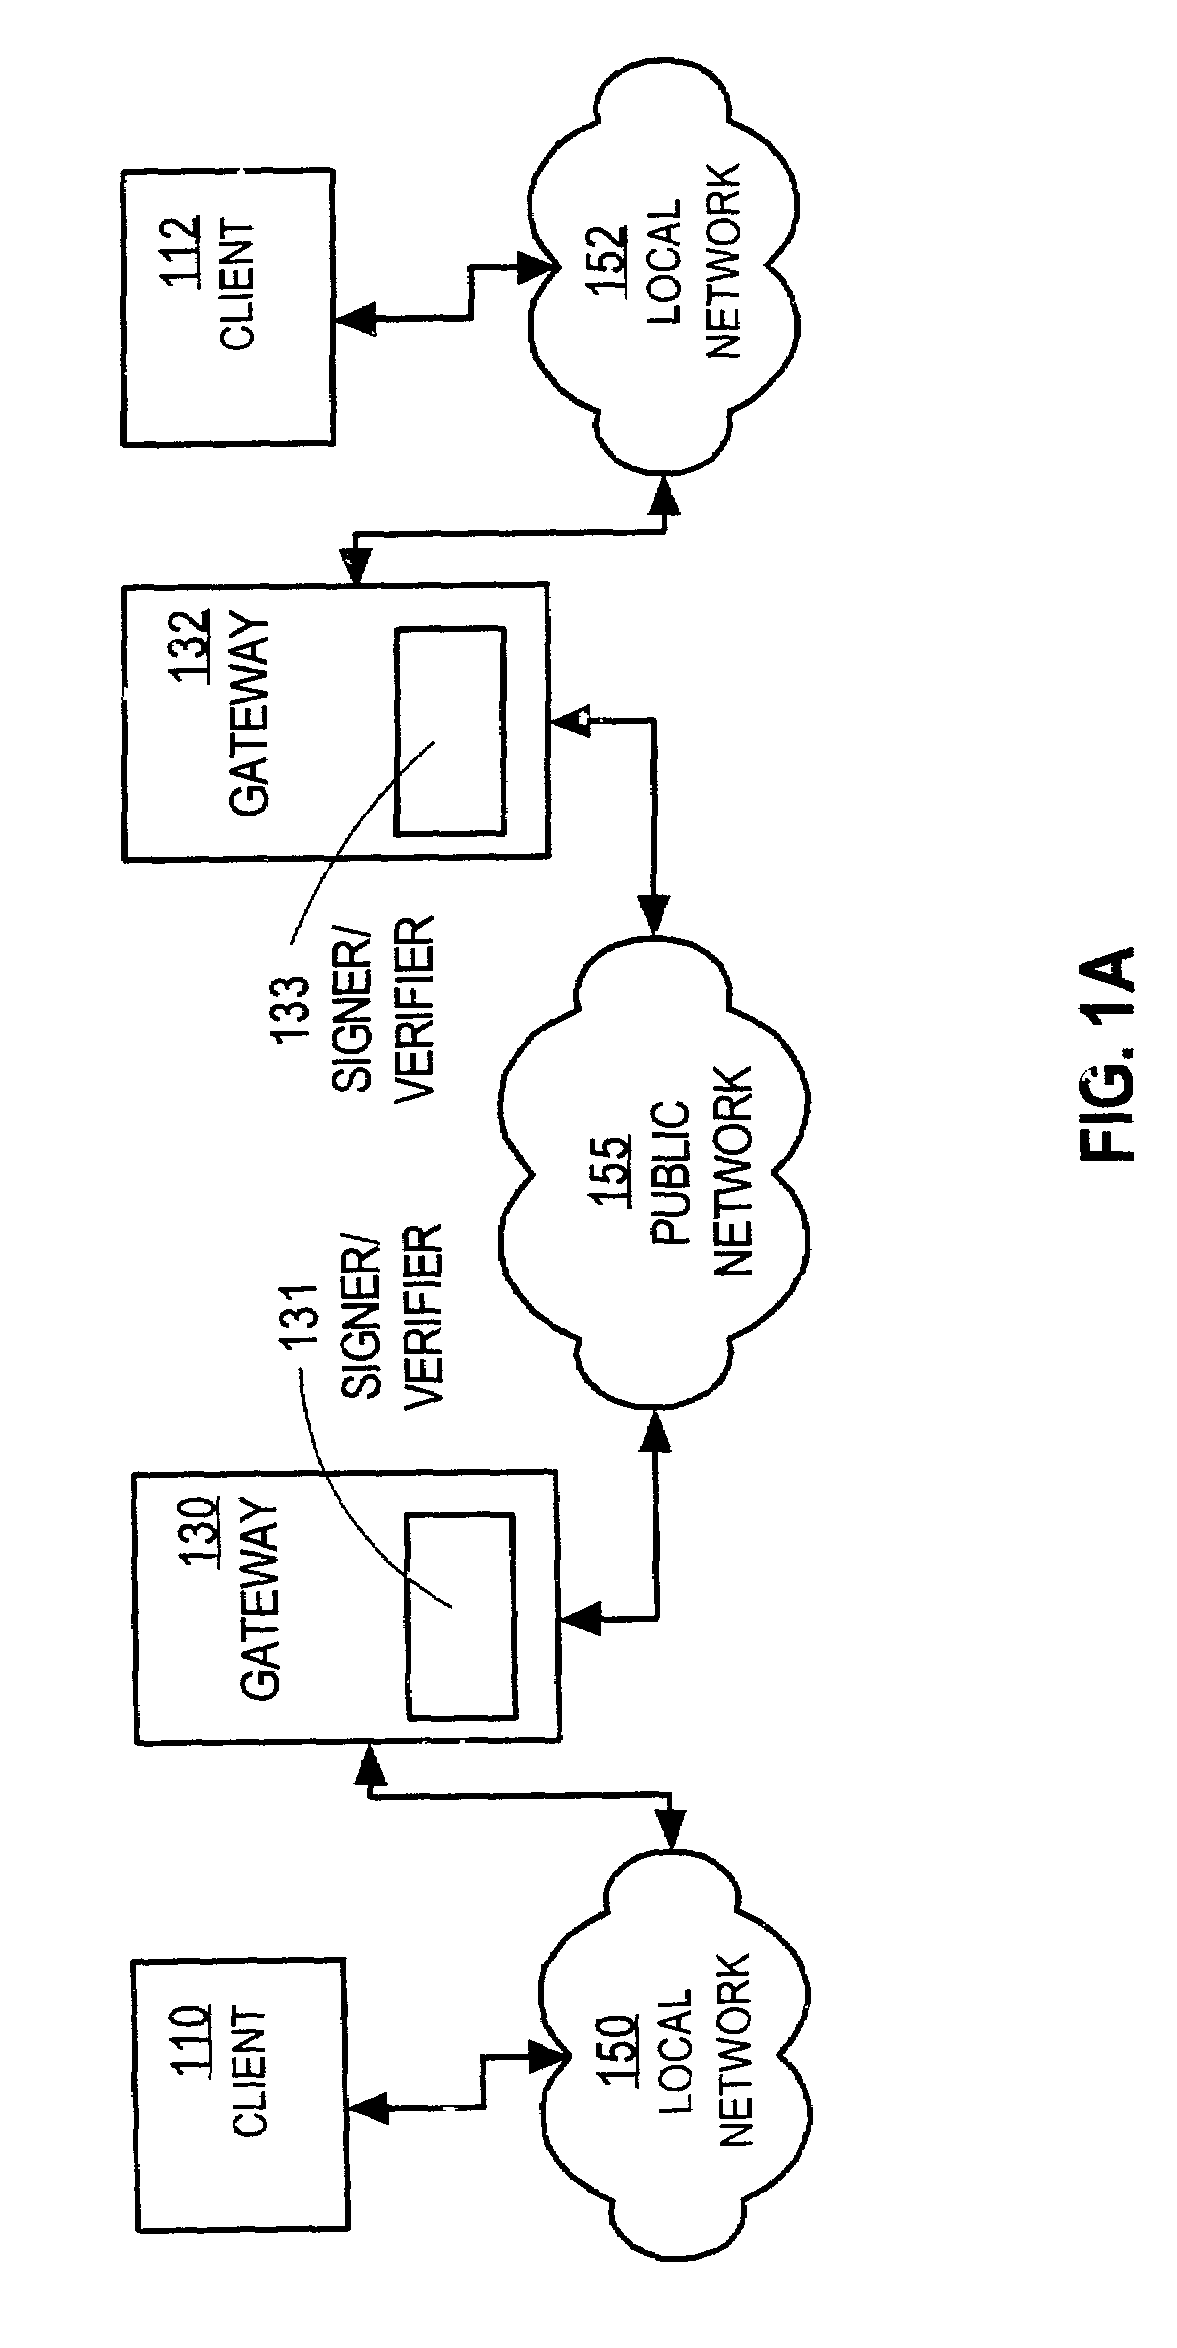 Method and apparatus for calculating a multiplicative inverse of an element of a prime field